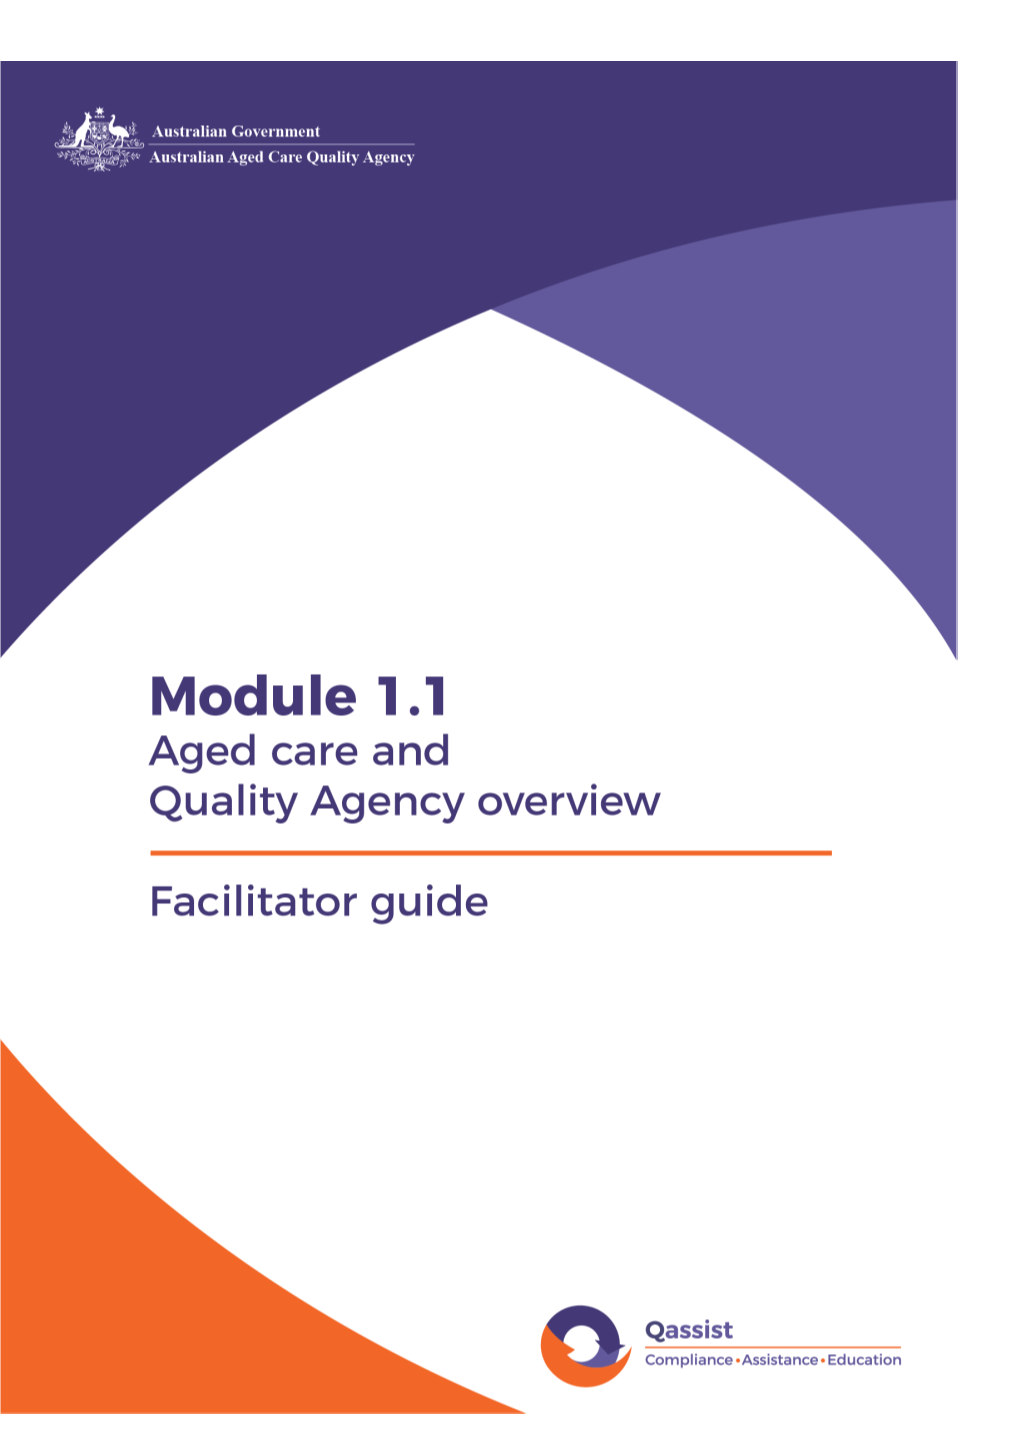 Module 1.1 Aged Care and Quality Agency Overview - Facilitator Guide